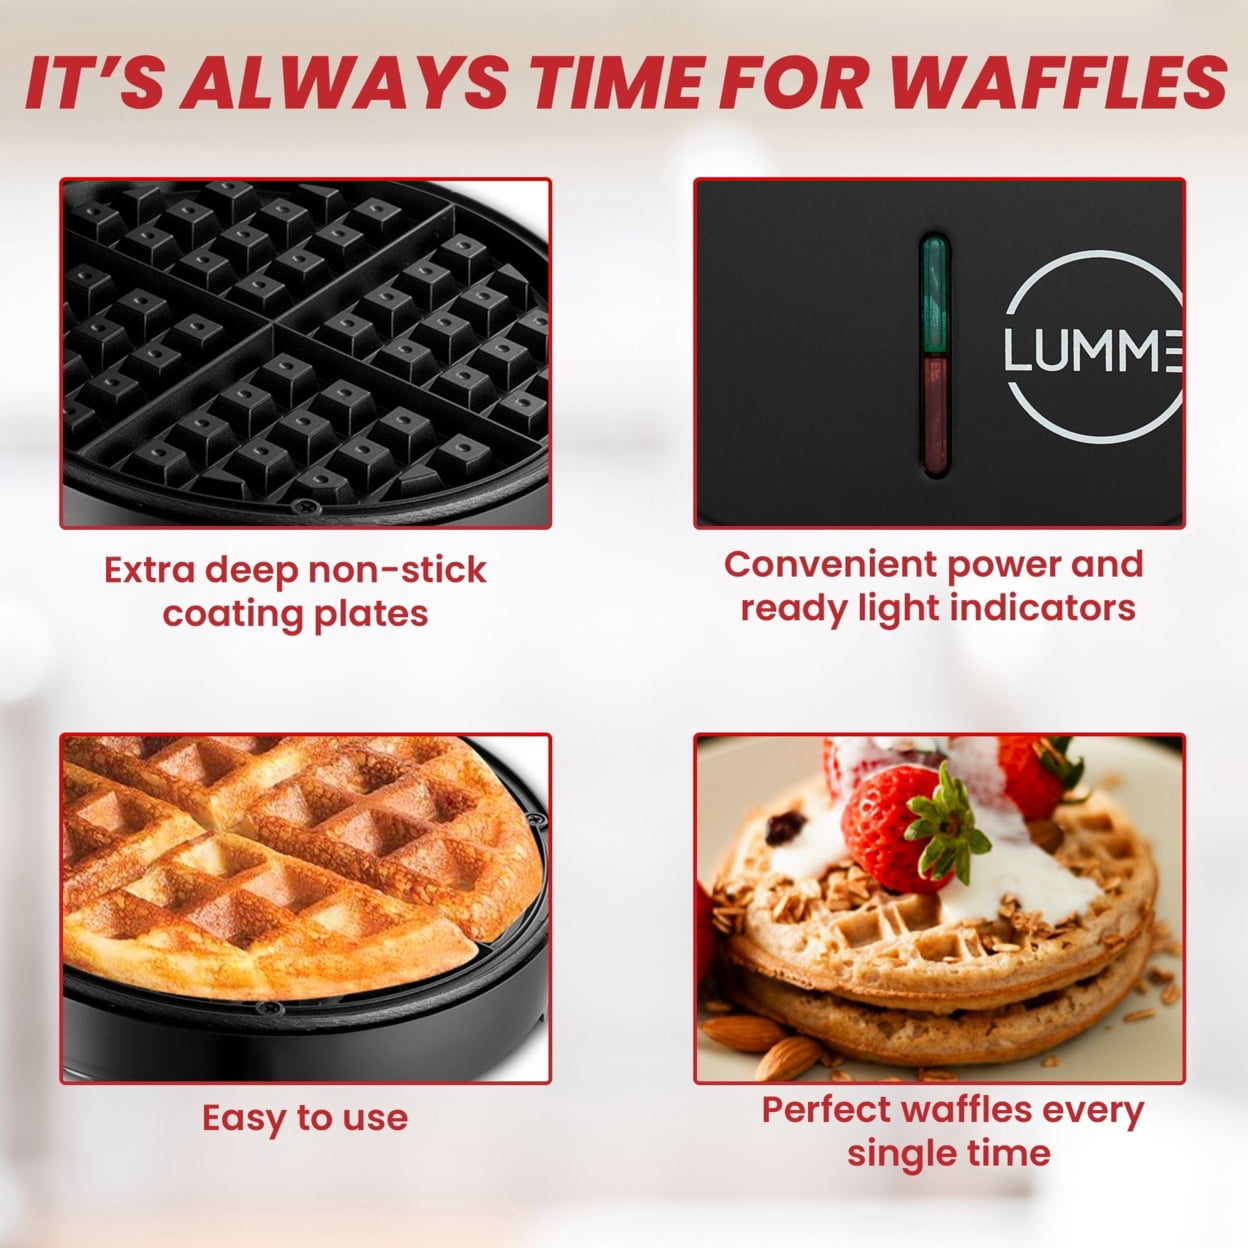 Listen up guys, this deal is BANANAS! I'll be on HSN tonight at 9pm PST  dishing out two 5” stuffed waffle makers, 24 recipes and gift boxes for  only